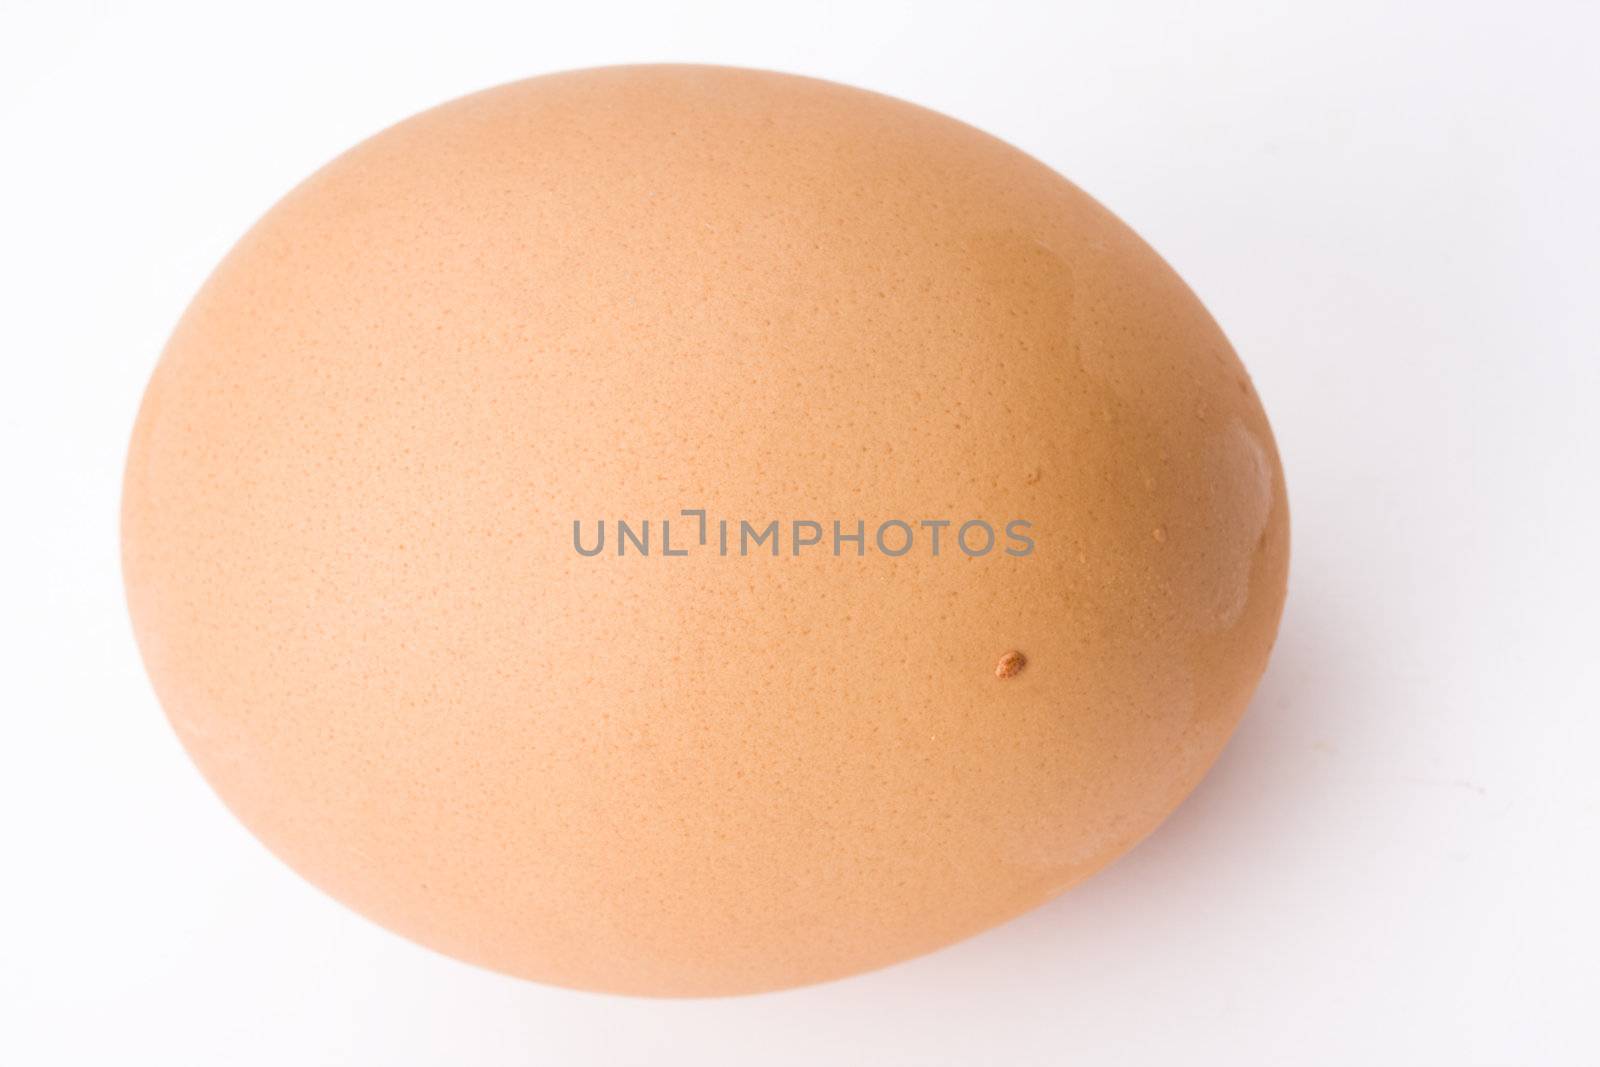 single beige egg on a white background by bernjuer